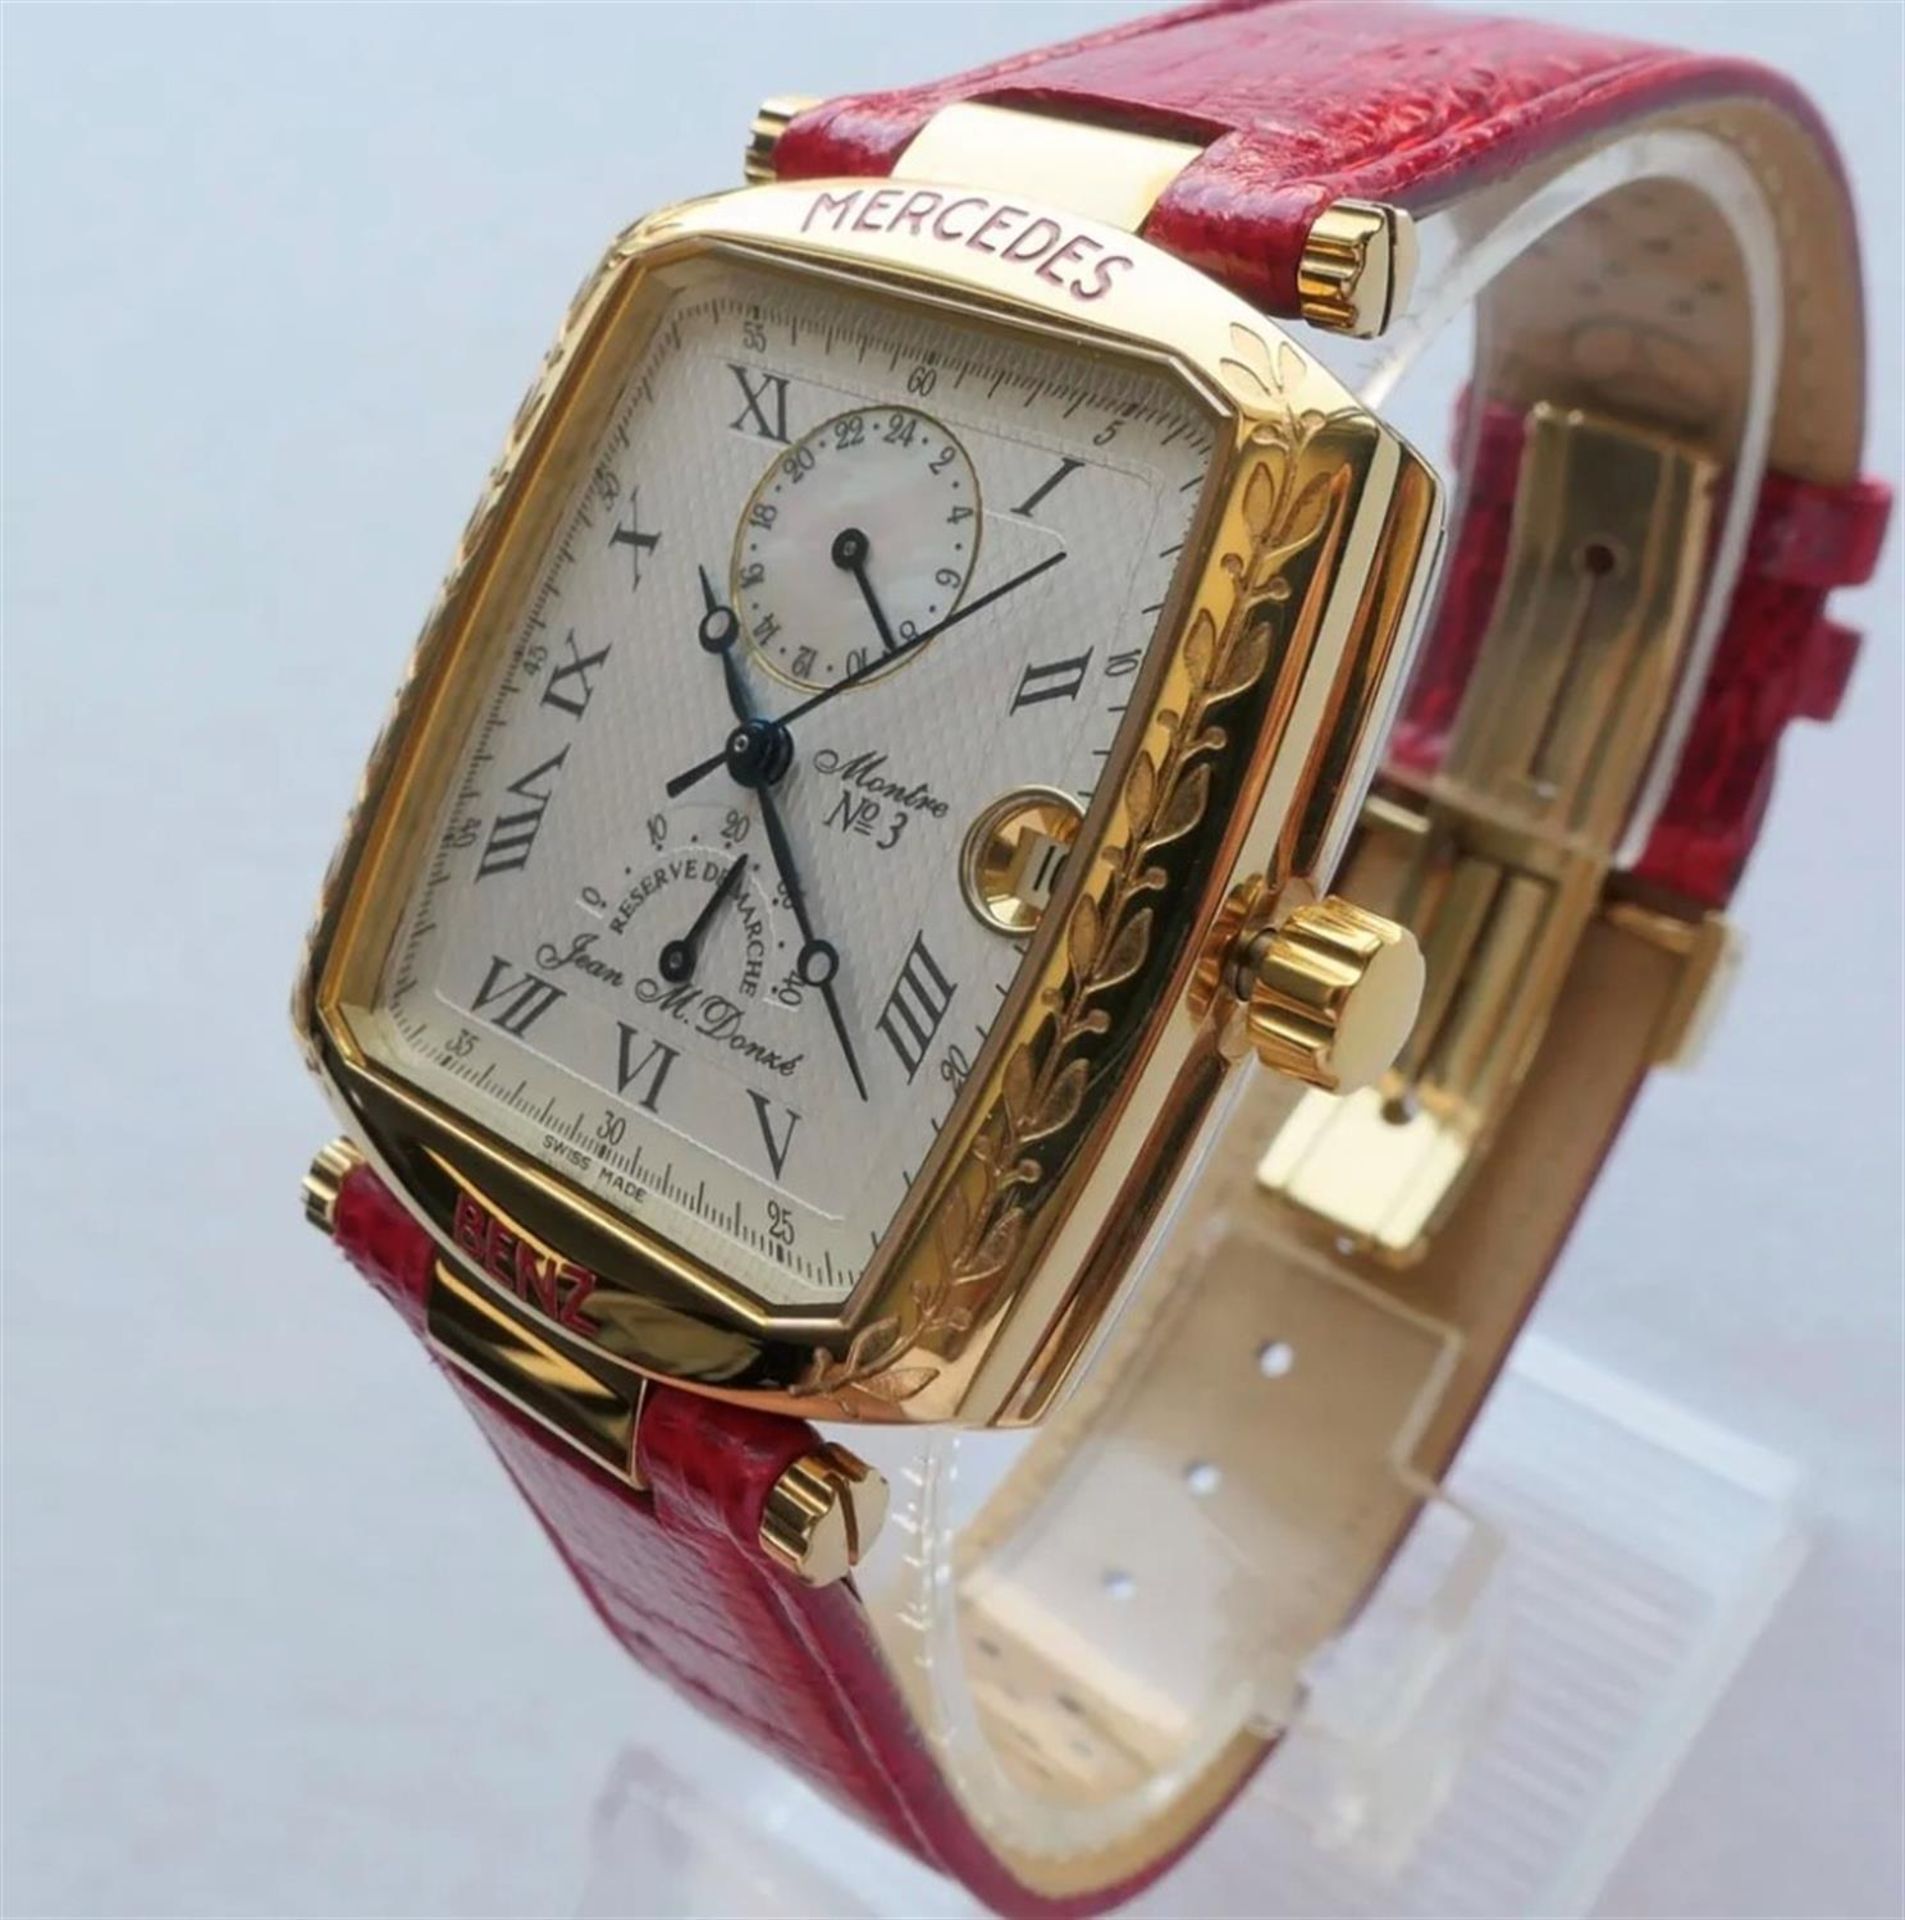 A 18ct Gold-Plated Mercedes-Benz Swiss-Made Automatic Wrist Watch - Image 2 of 10